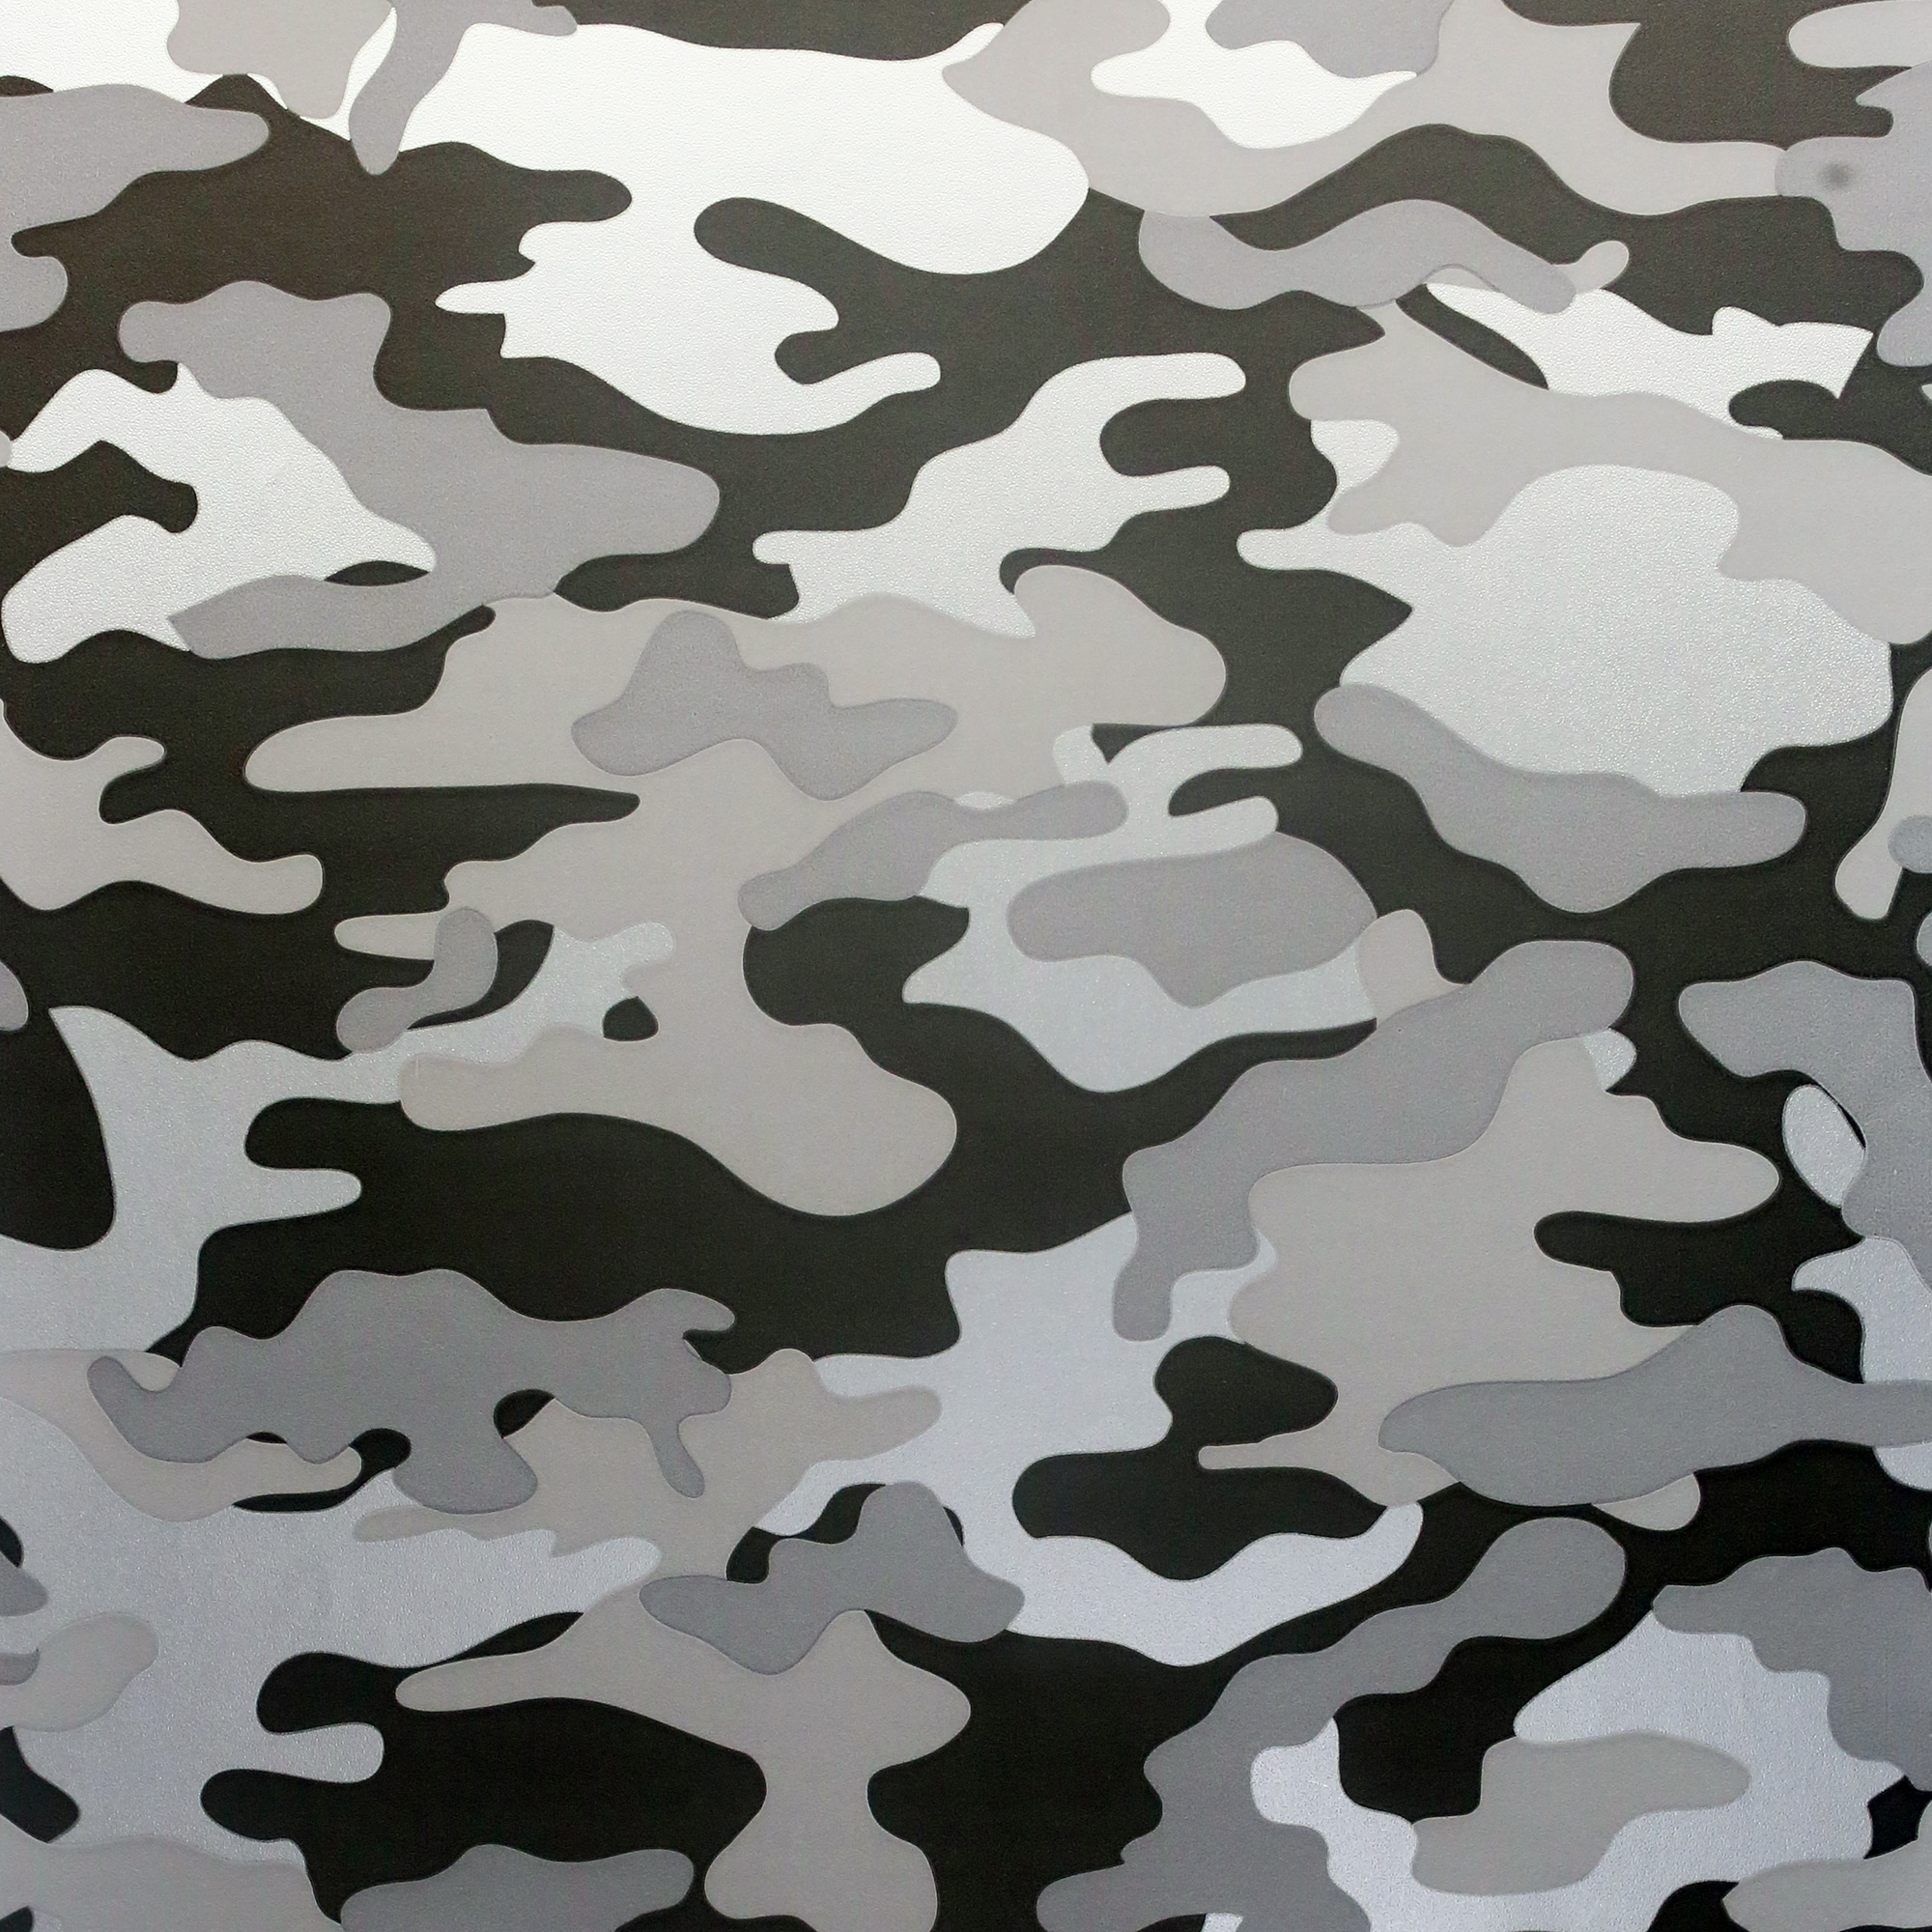 2000x2000 Camouflage Wallpaper at